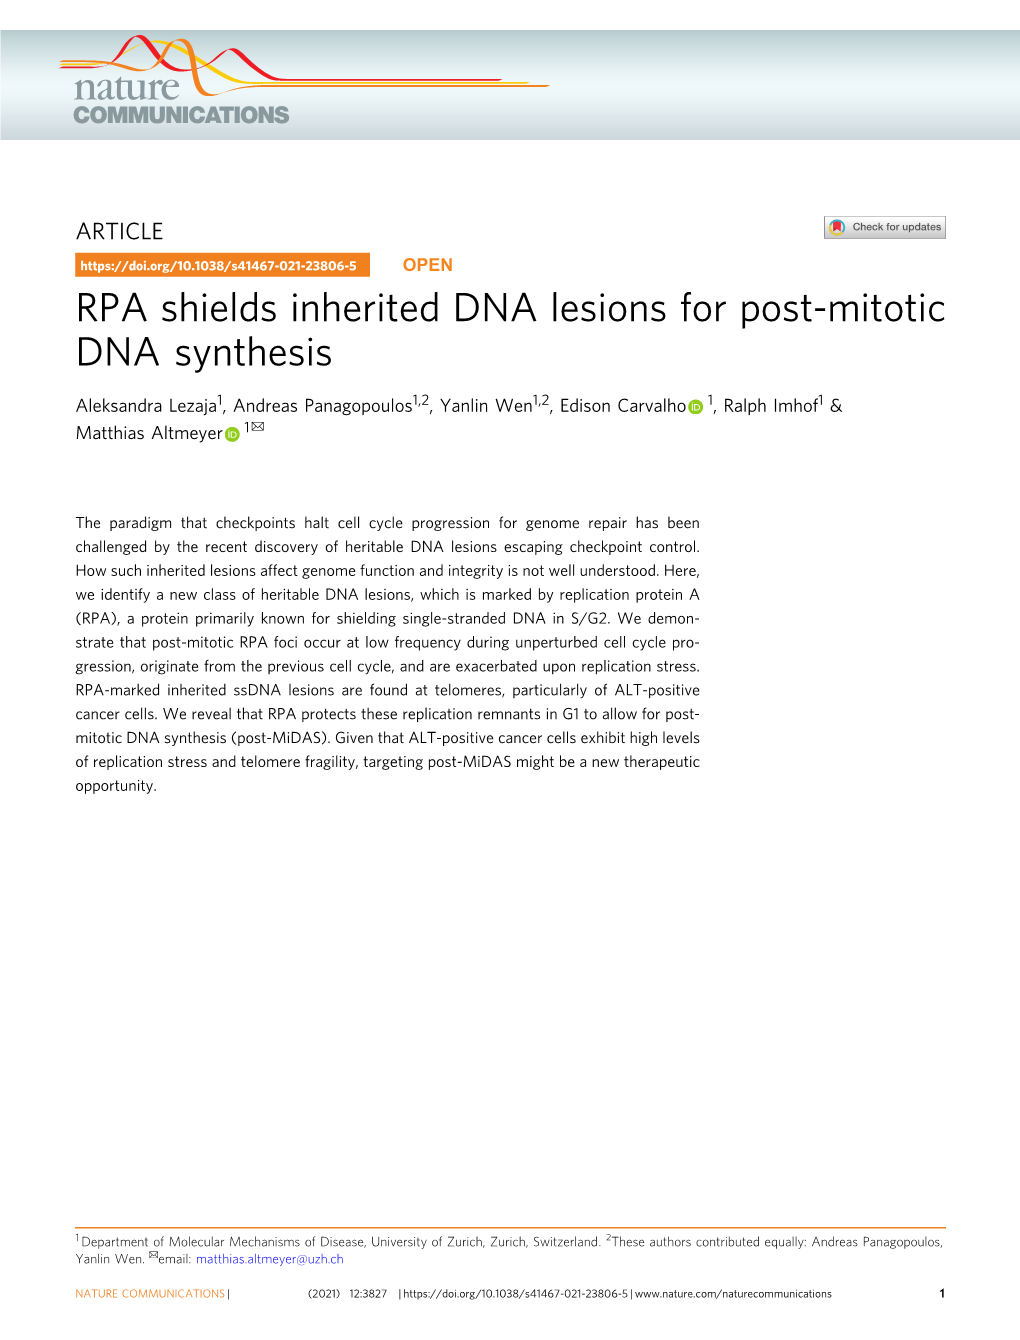 RPA Shields Inherited DNA Lesions for Post-Mitotic DNA Synthesis